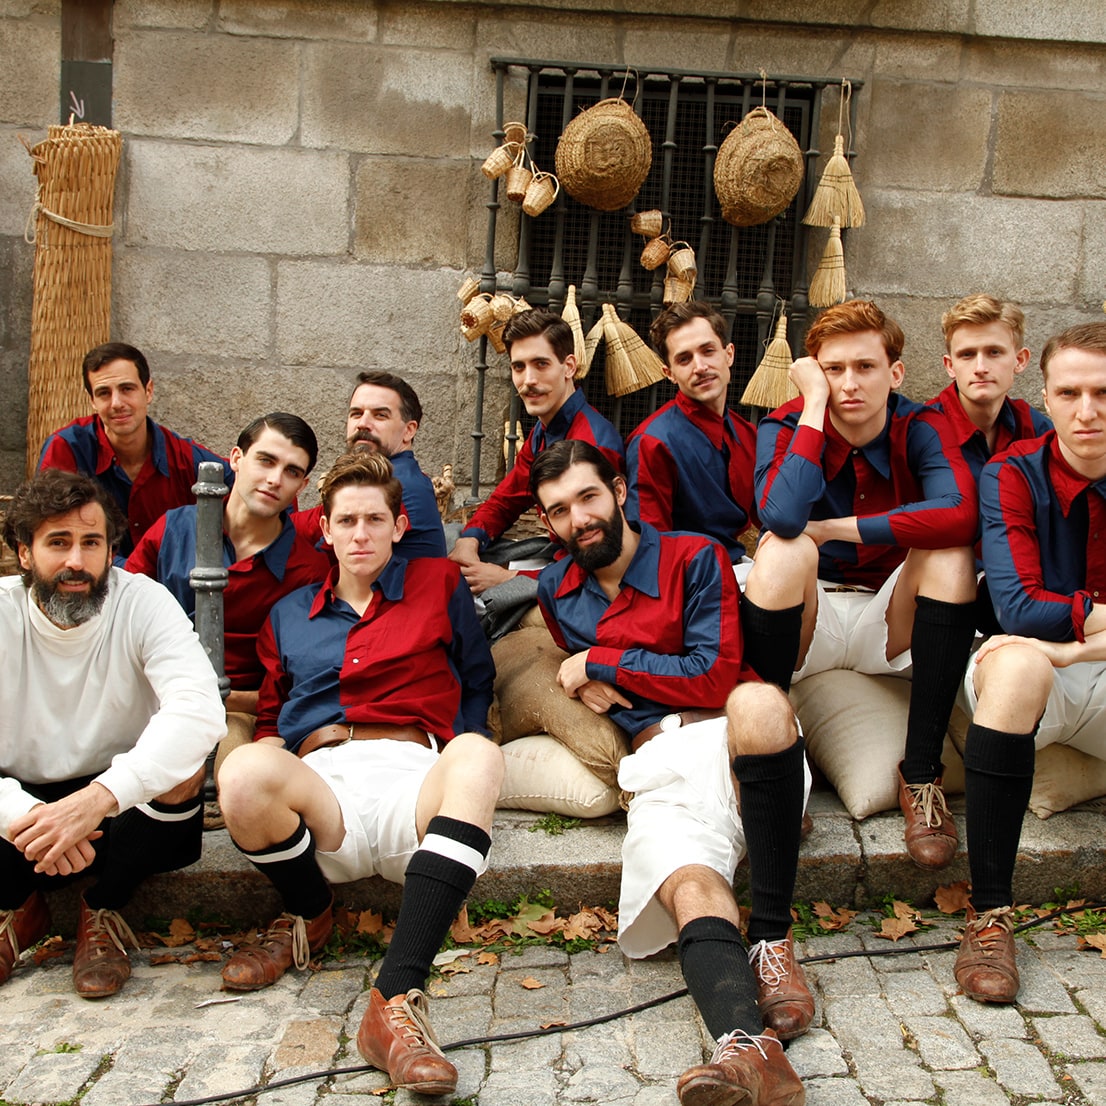 The FC Barcelona players from the short movie, “El Clásico”.